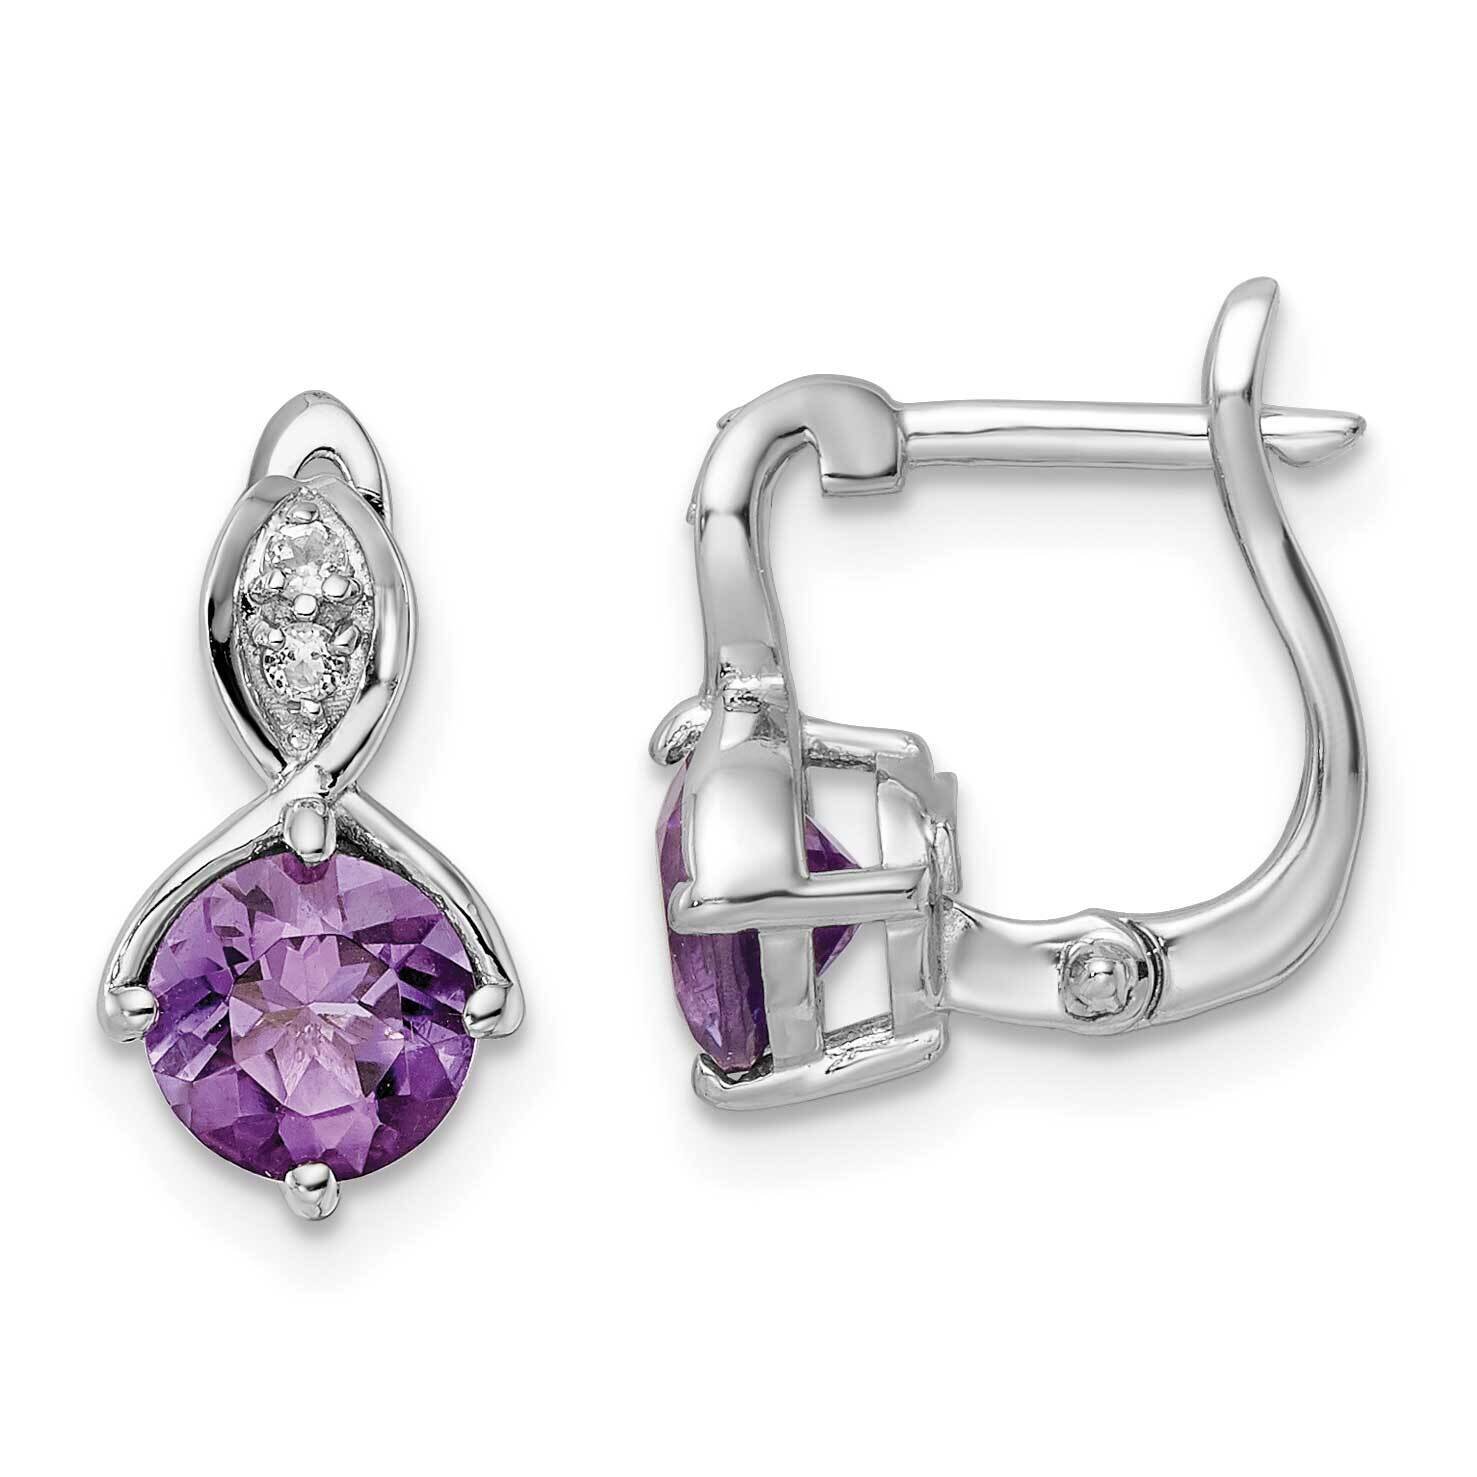 1.95Tw Amethyst White Topaz Hinged Earrings Sterling Silver Rhodium-Plated QE16642AM